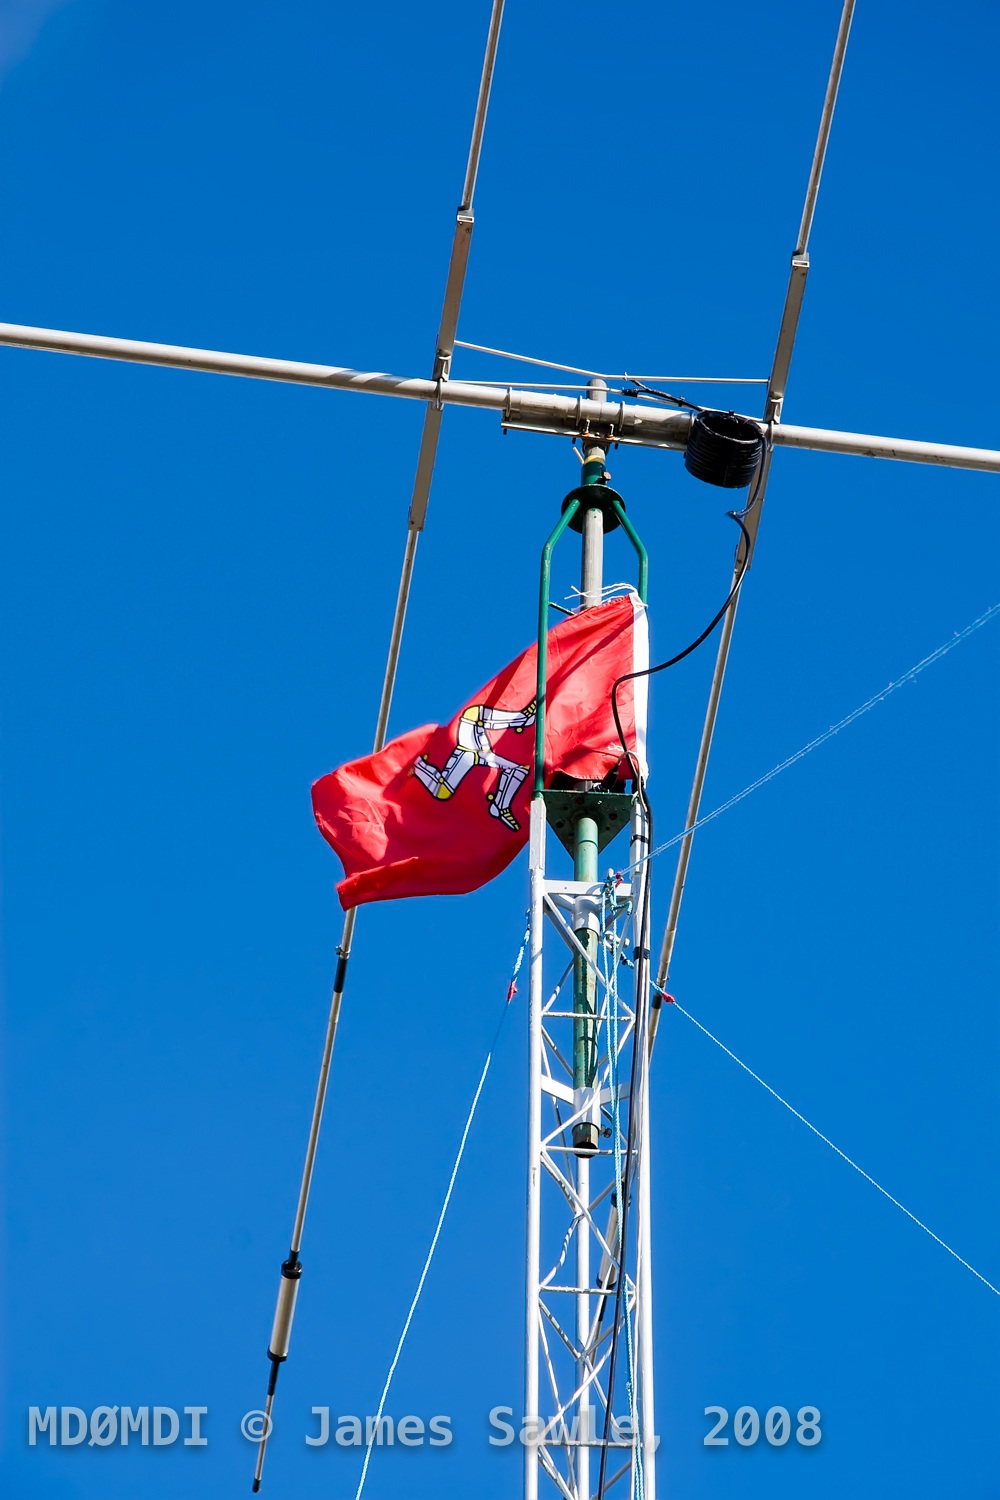 Closeup of the Mosley Beam an the Manx Flag